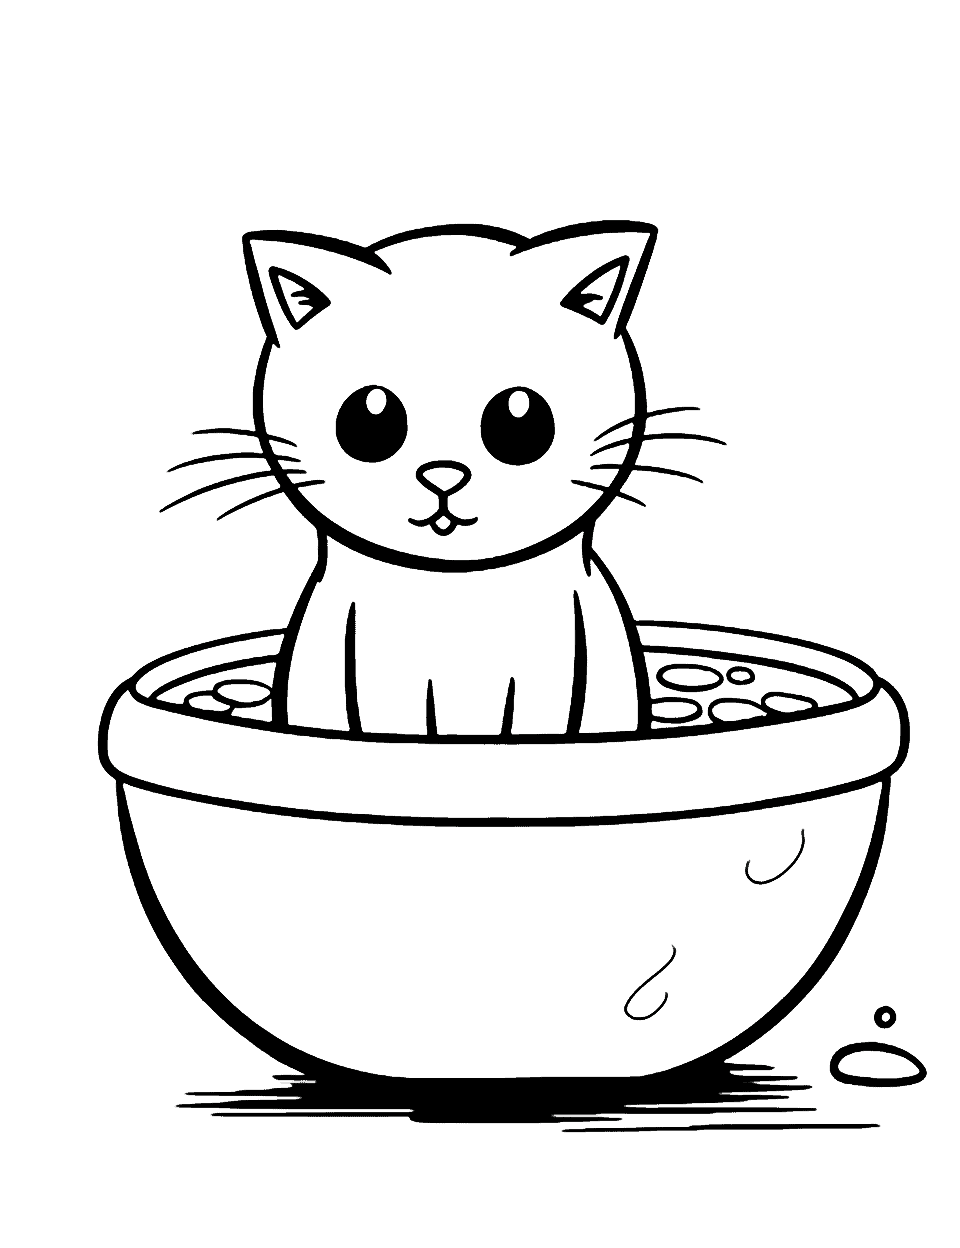 Cat coloring pages free printable sheets